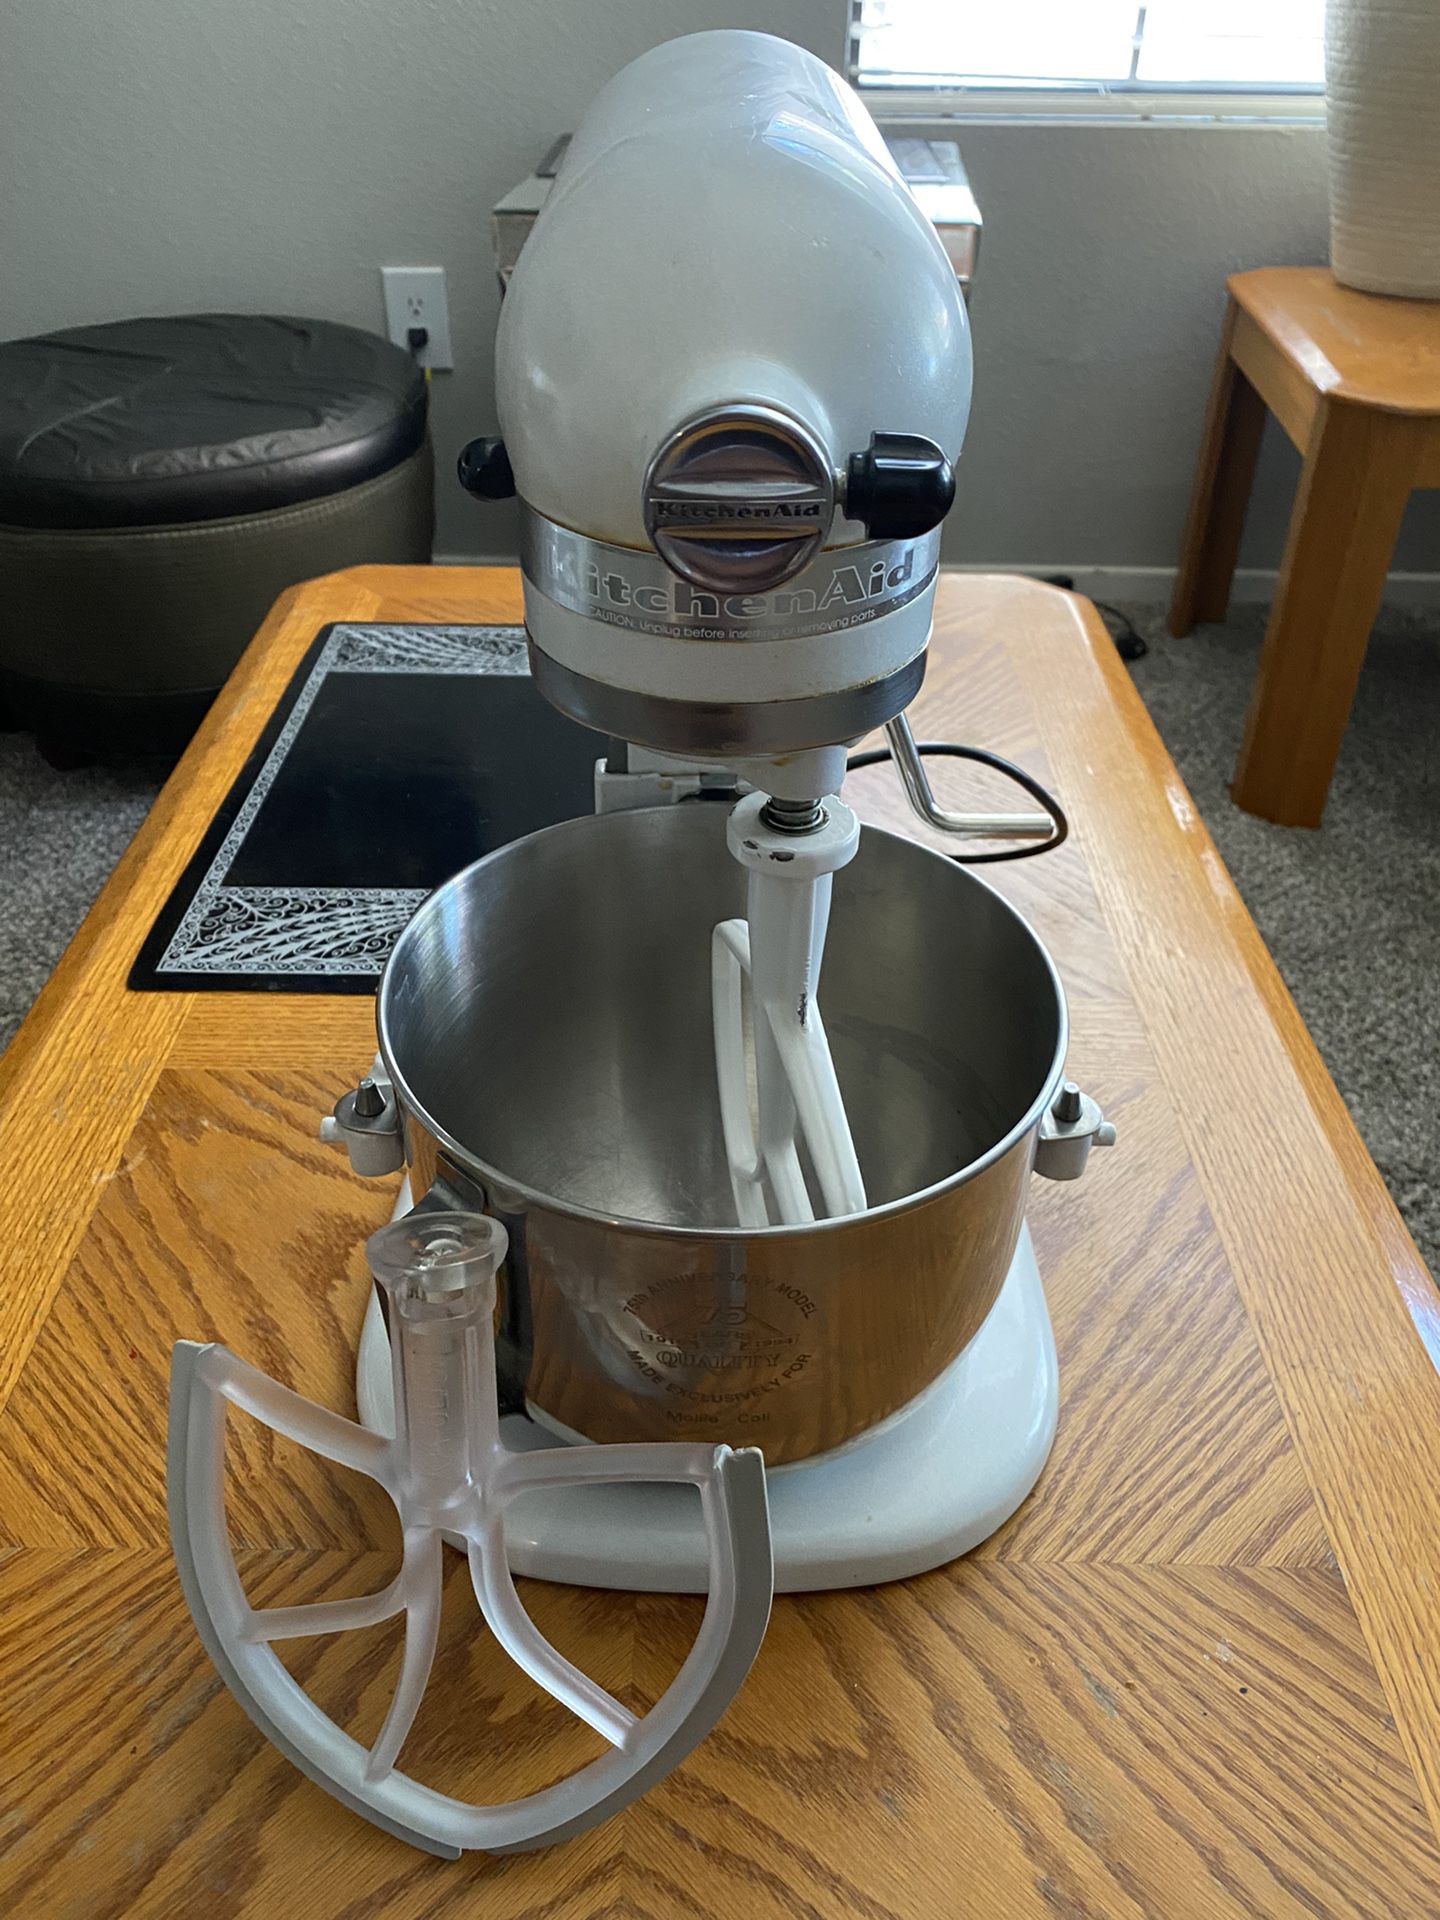 KitchenAid Mixer 75 Anniversary Special Edition- White. Model Number-  WD(contact info removed). for Sale in Las Vegas, NV - OfferUp